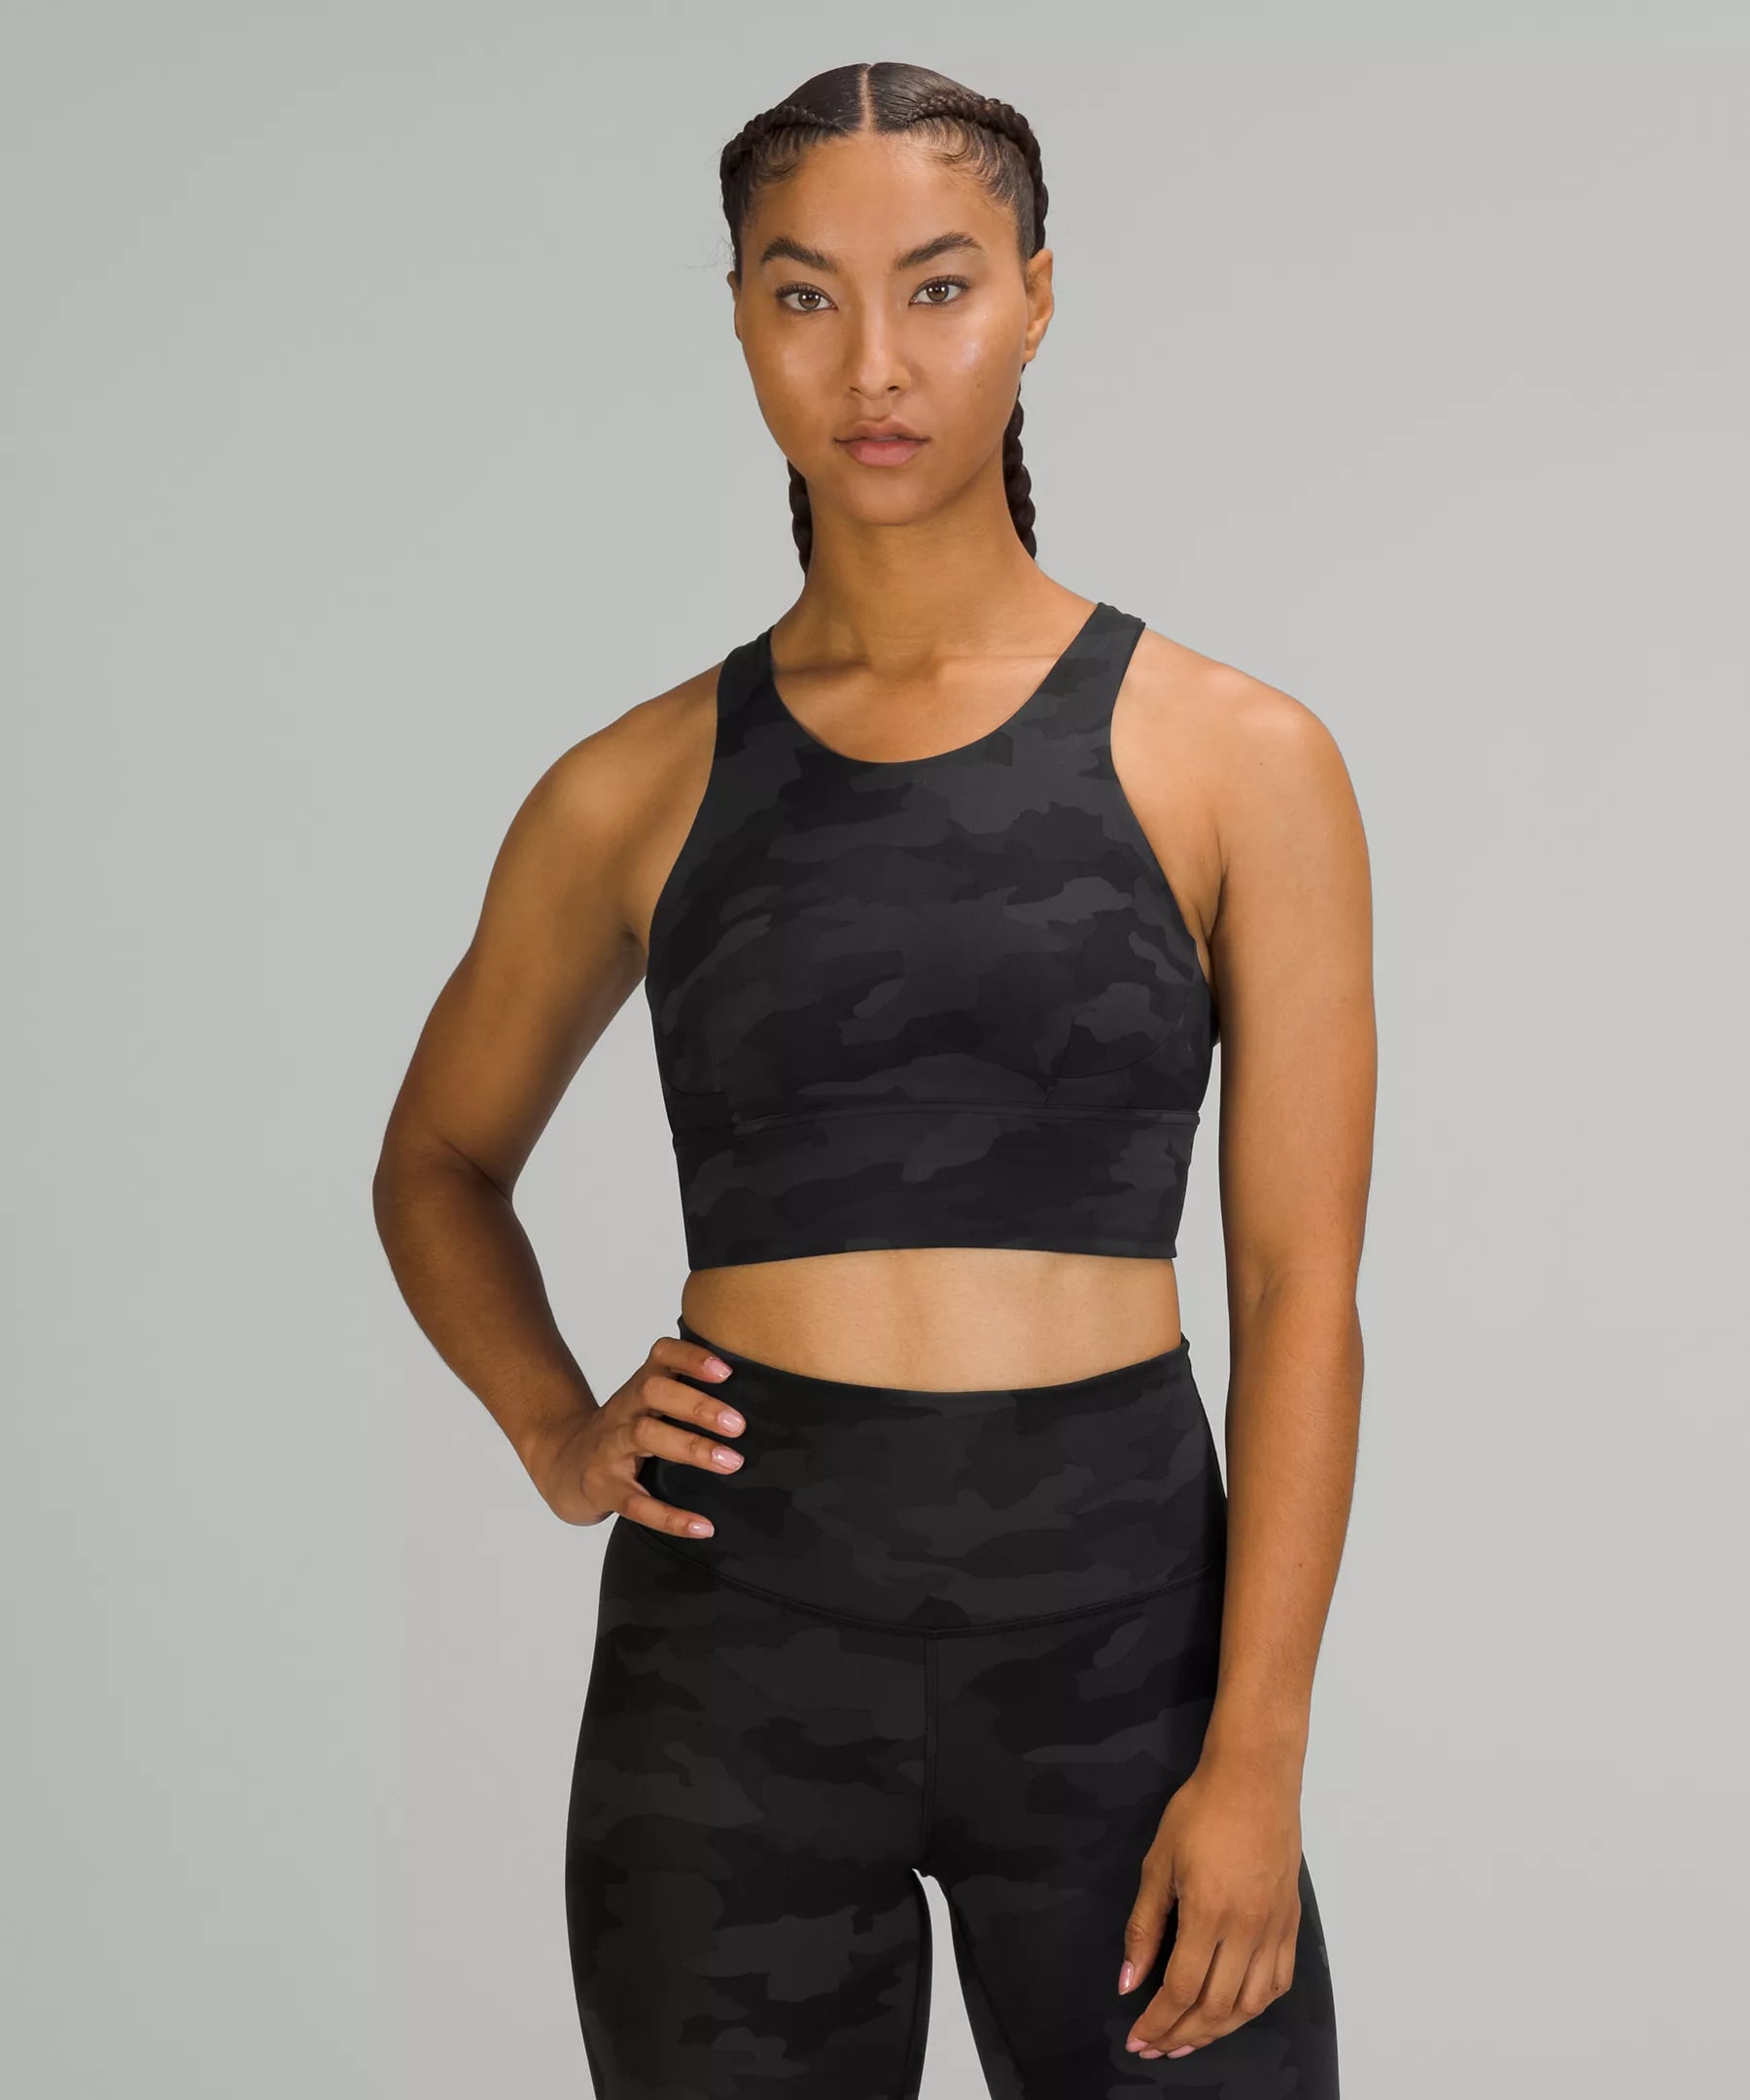 NYT Wirecutter on Instagram: A truly supportive sports bra can be